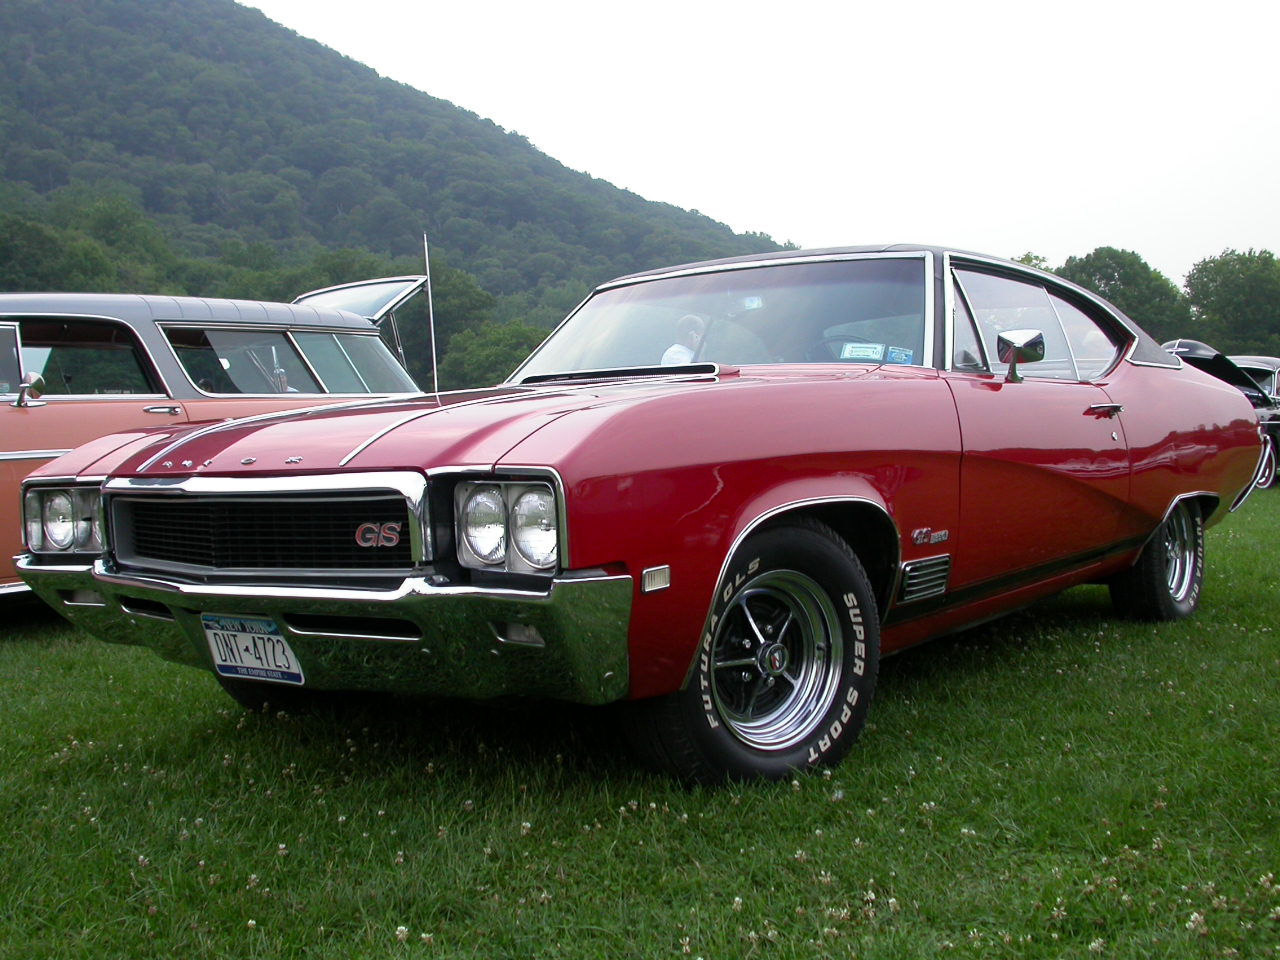 Buick GS 400